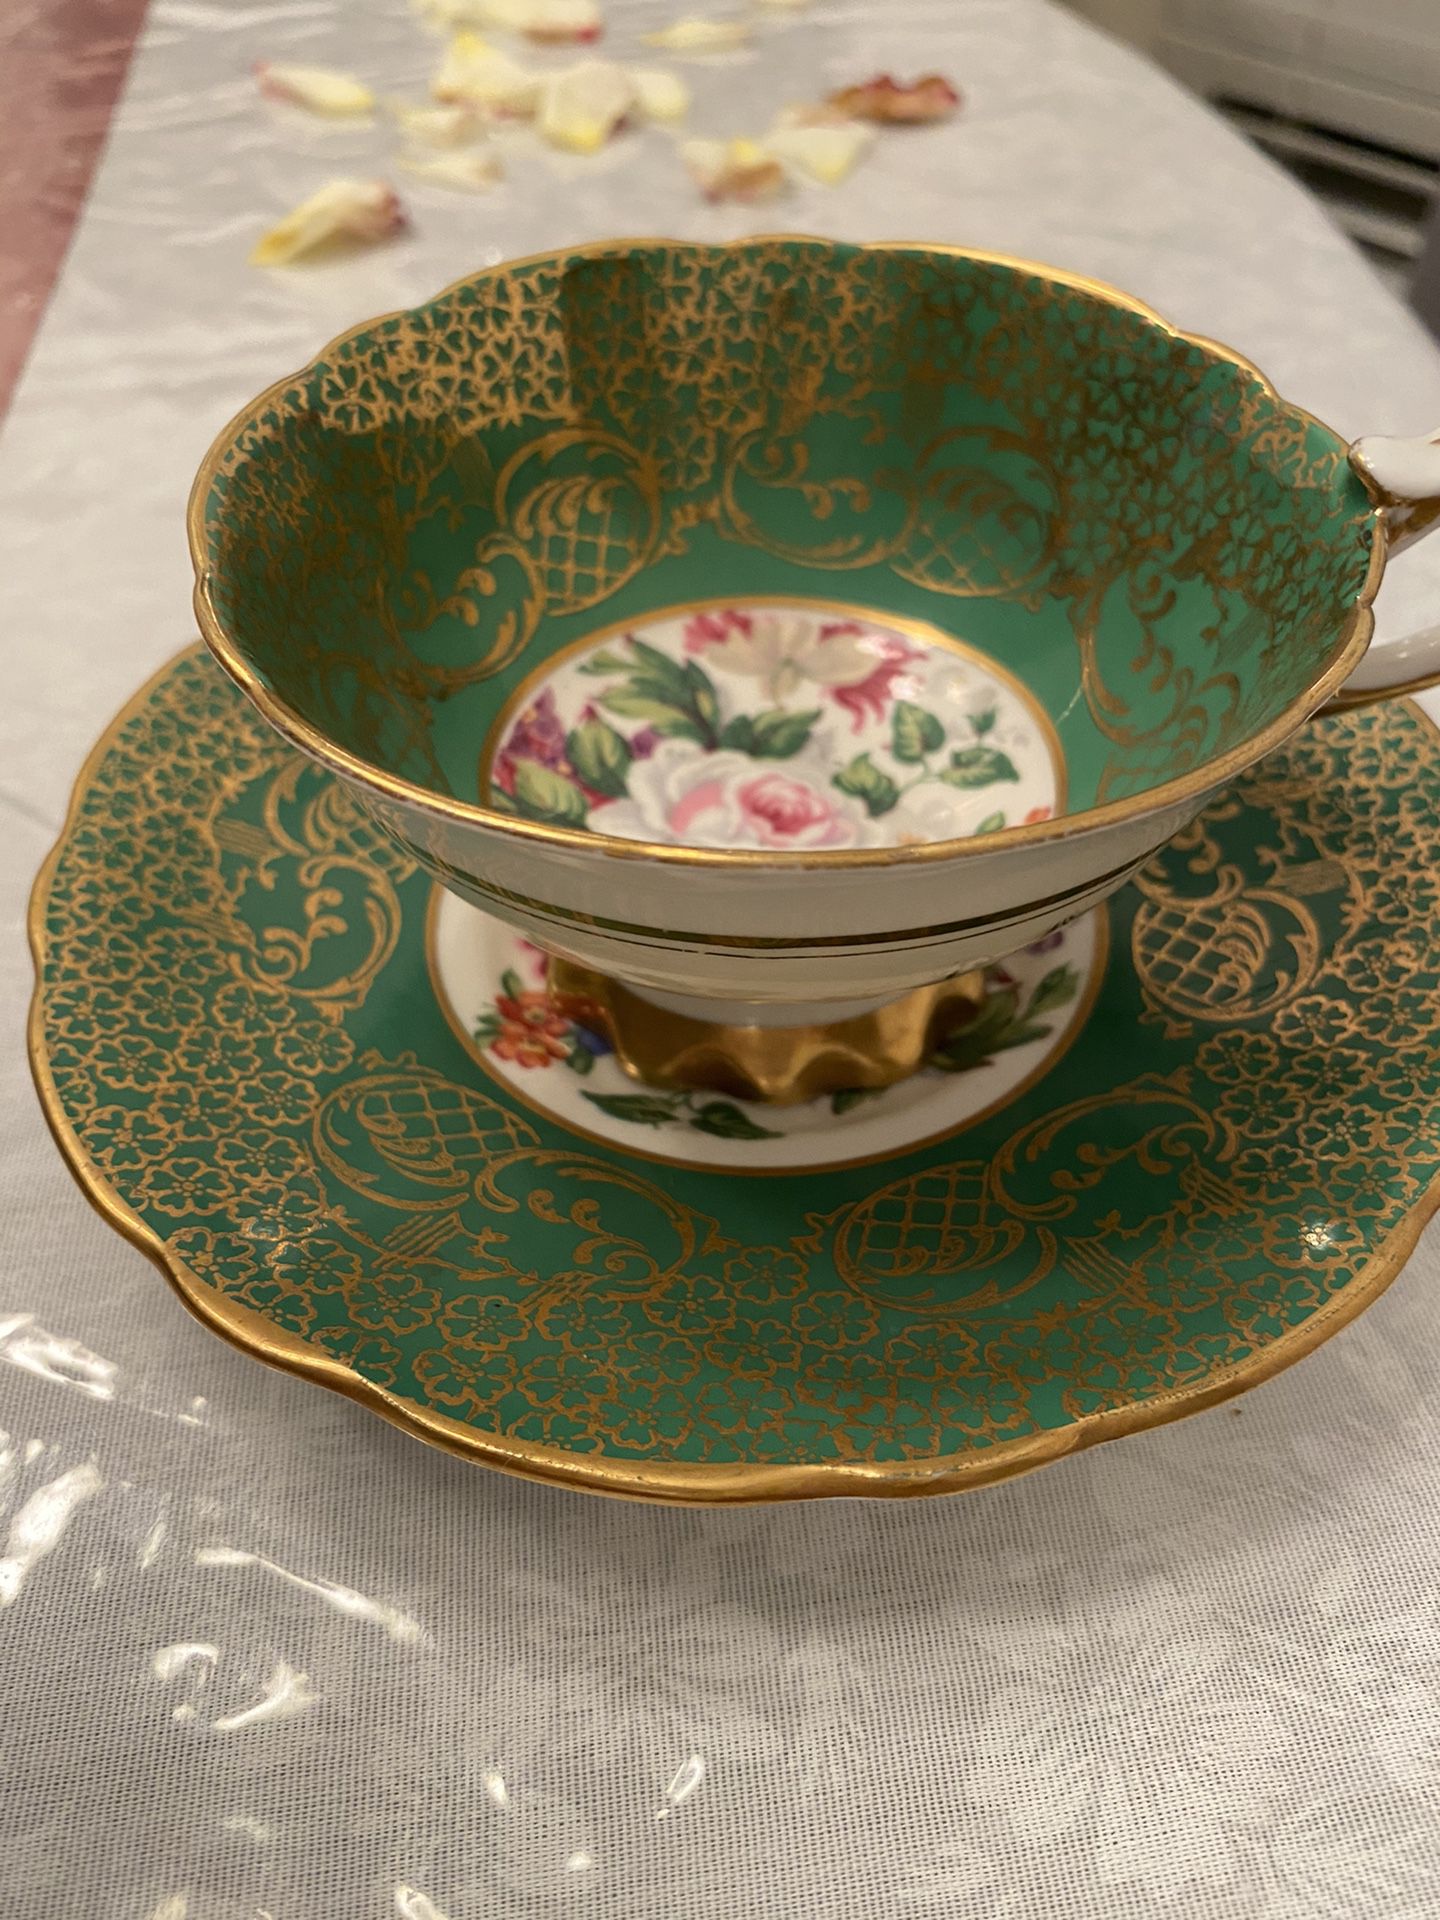 Antique, Empress Royal Stanford cup and Saucer. Made in England.